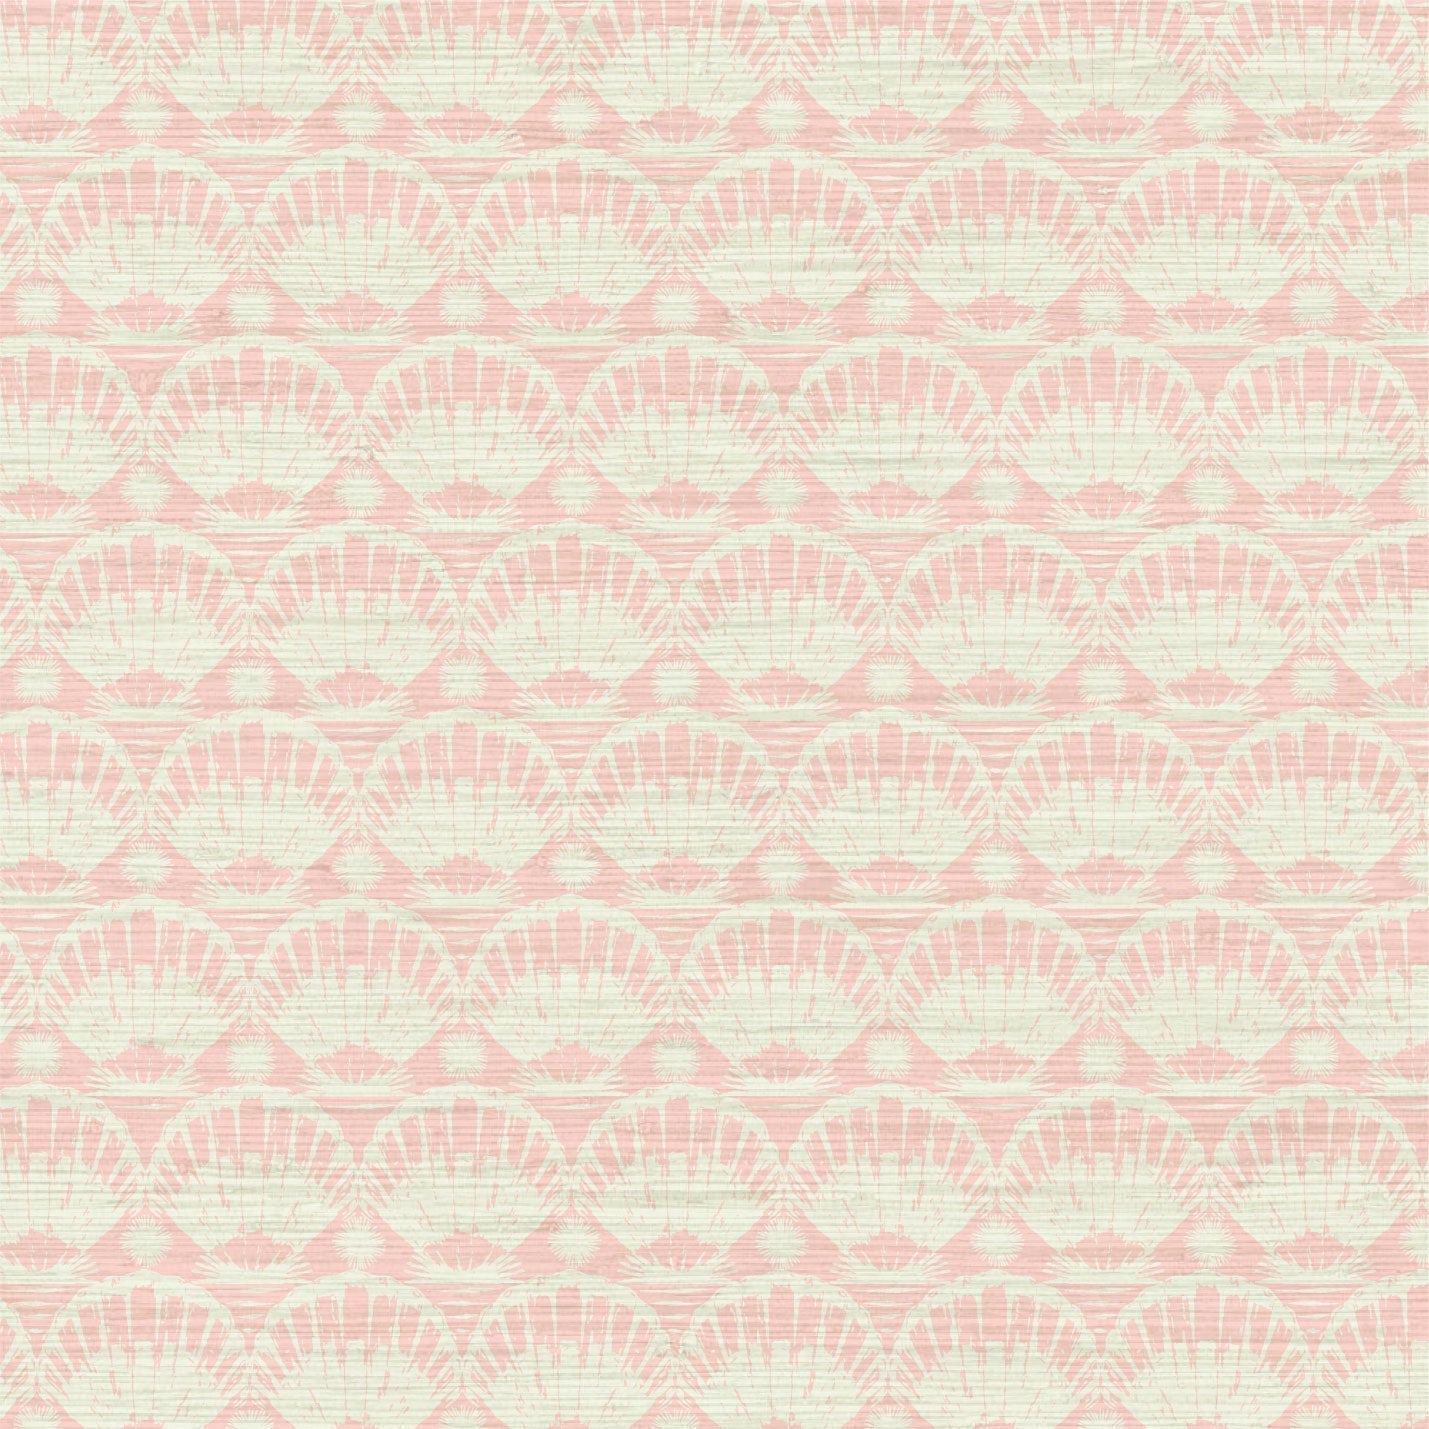 printed grasscloth wallpaper seashell horizontal stripe Natural Textured Eco-Friendly Non-toxic High-quality Sustainable practices Sustainability Interior Design Wall covering custom tailor-made retro chic tropical bespoke nature Seaside Coastal Seashore Waterfront Vacation home styling Retreat Relaxed beach vibes Beach cottage Shoreline Oceanfront Nautical neutral white baby pink pastel